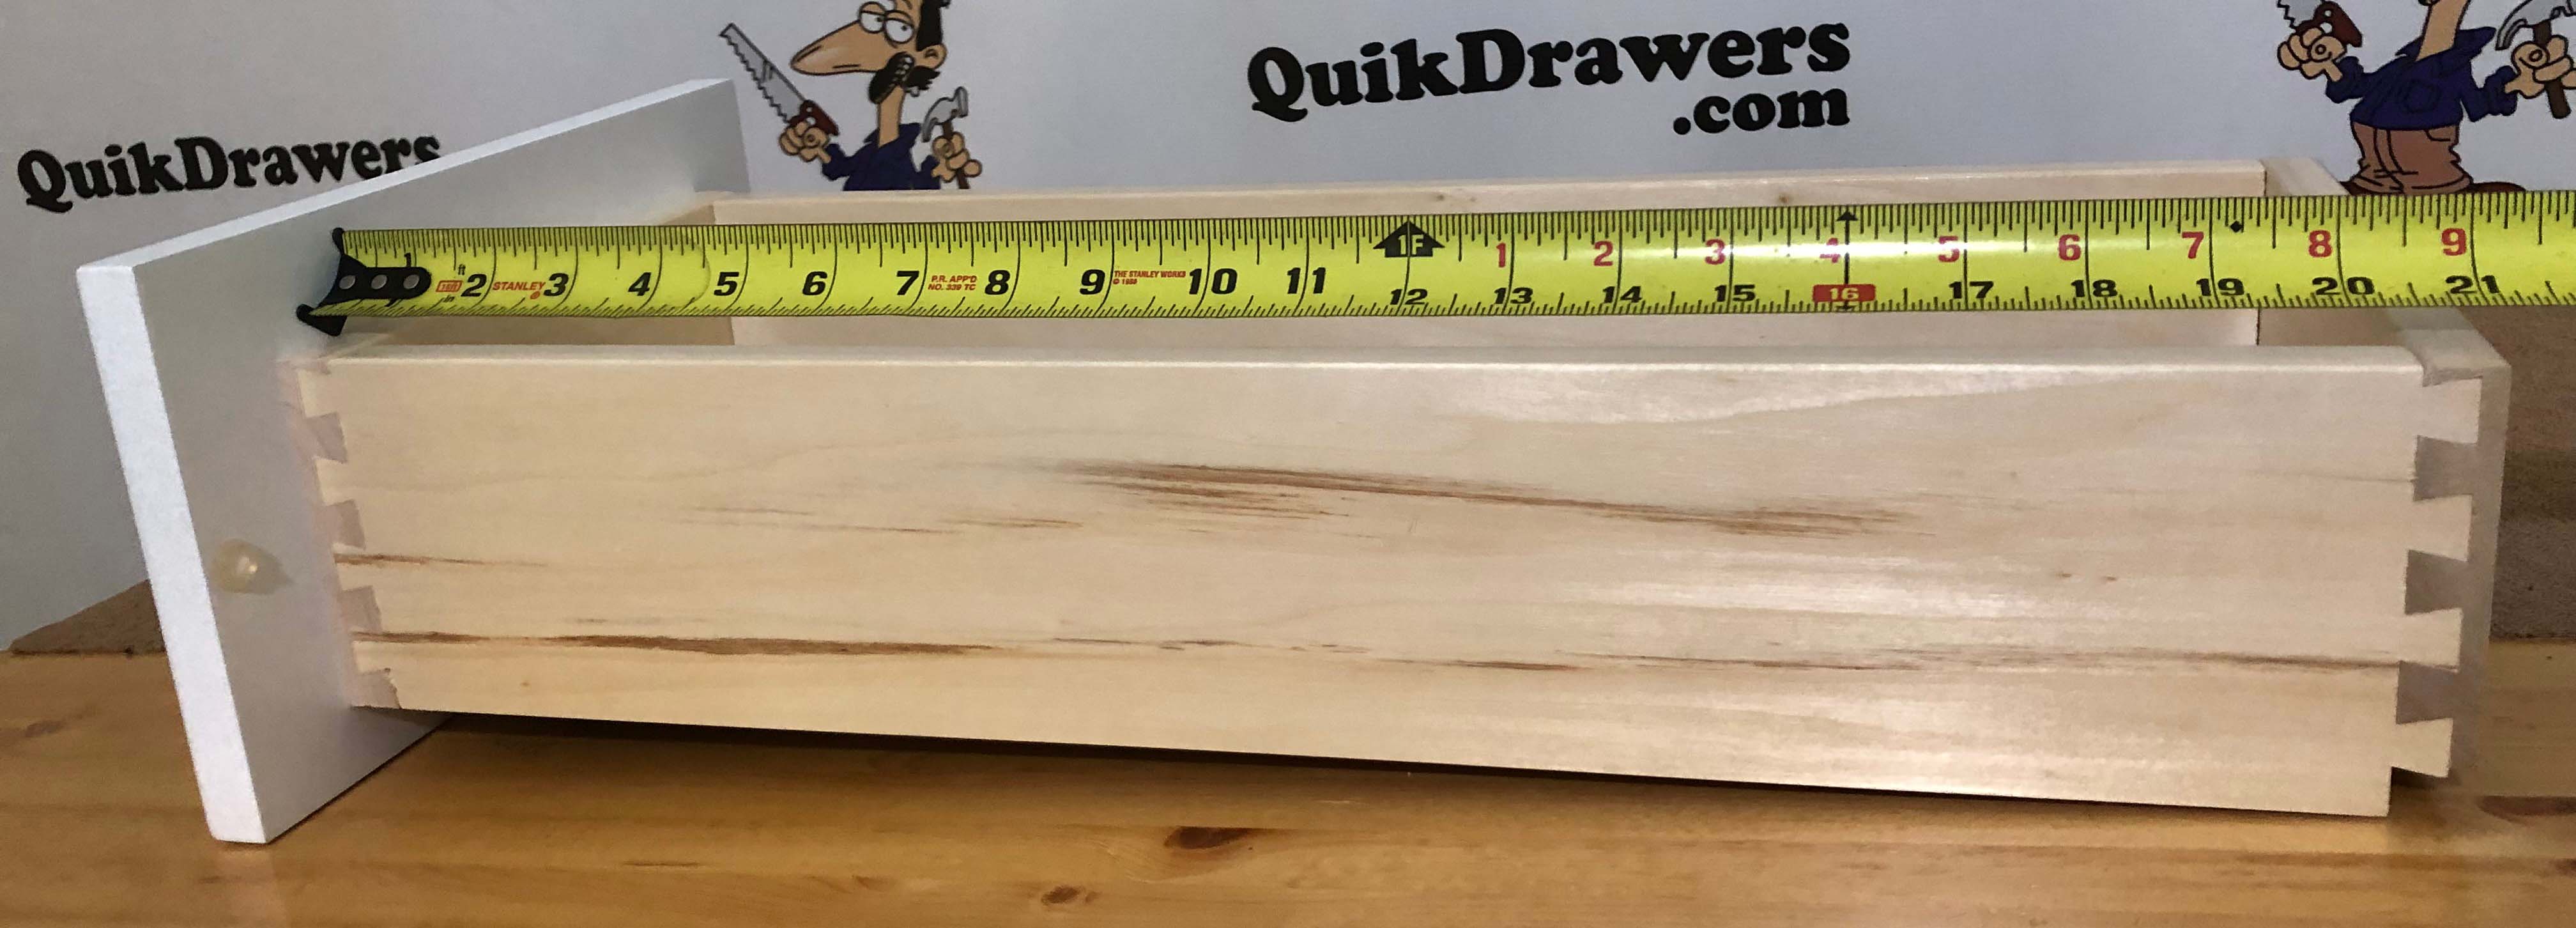 https://quikdrawers.com/image/catalog/Instructional%20Images/Measuring%20Replacement%20Drawers/Measure%20Depth%20Replacement%20Drawer.jpg